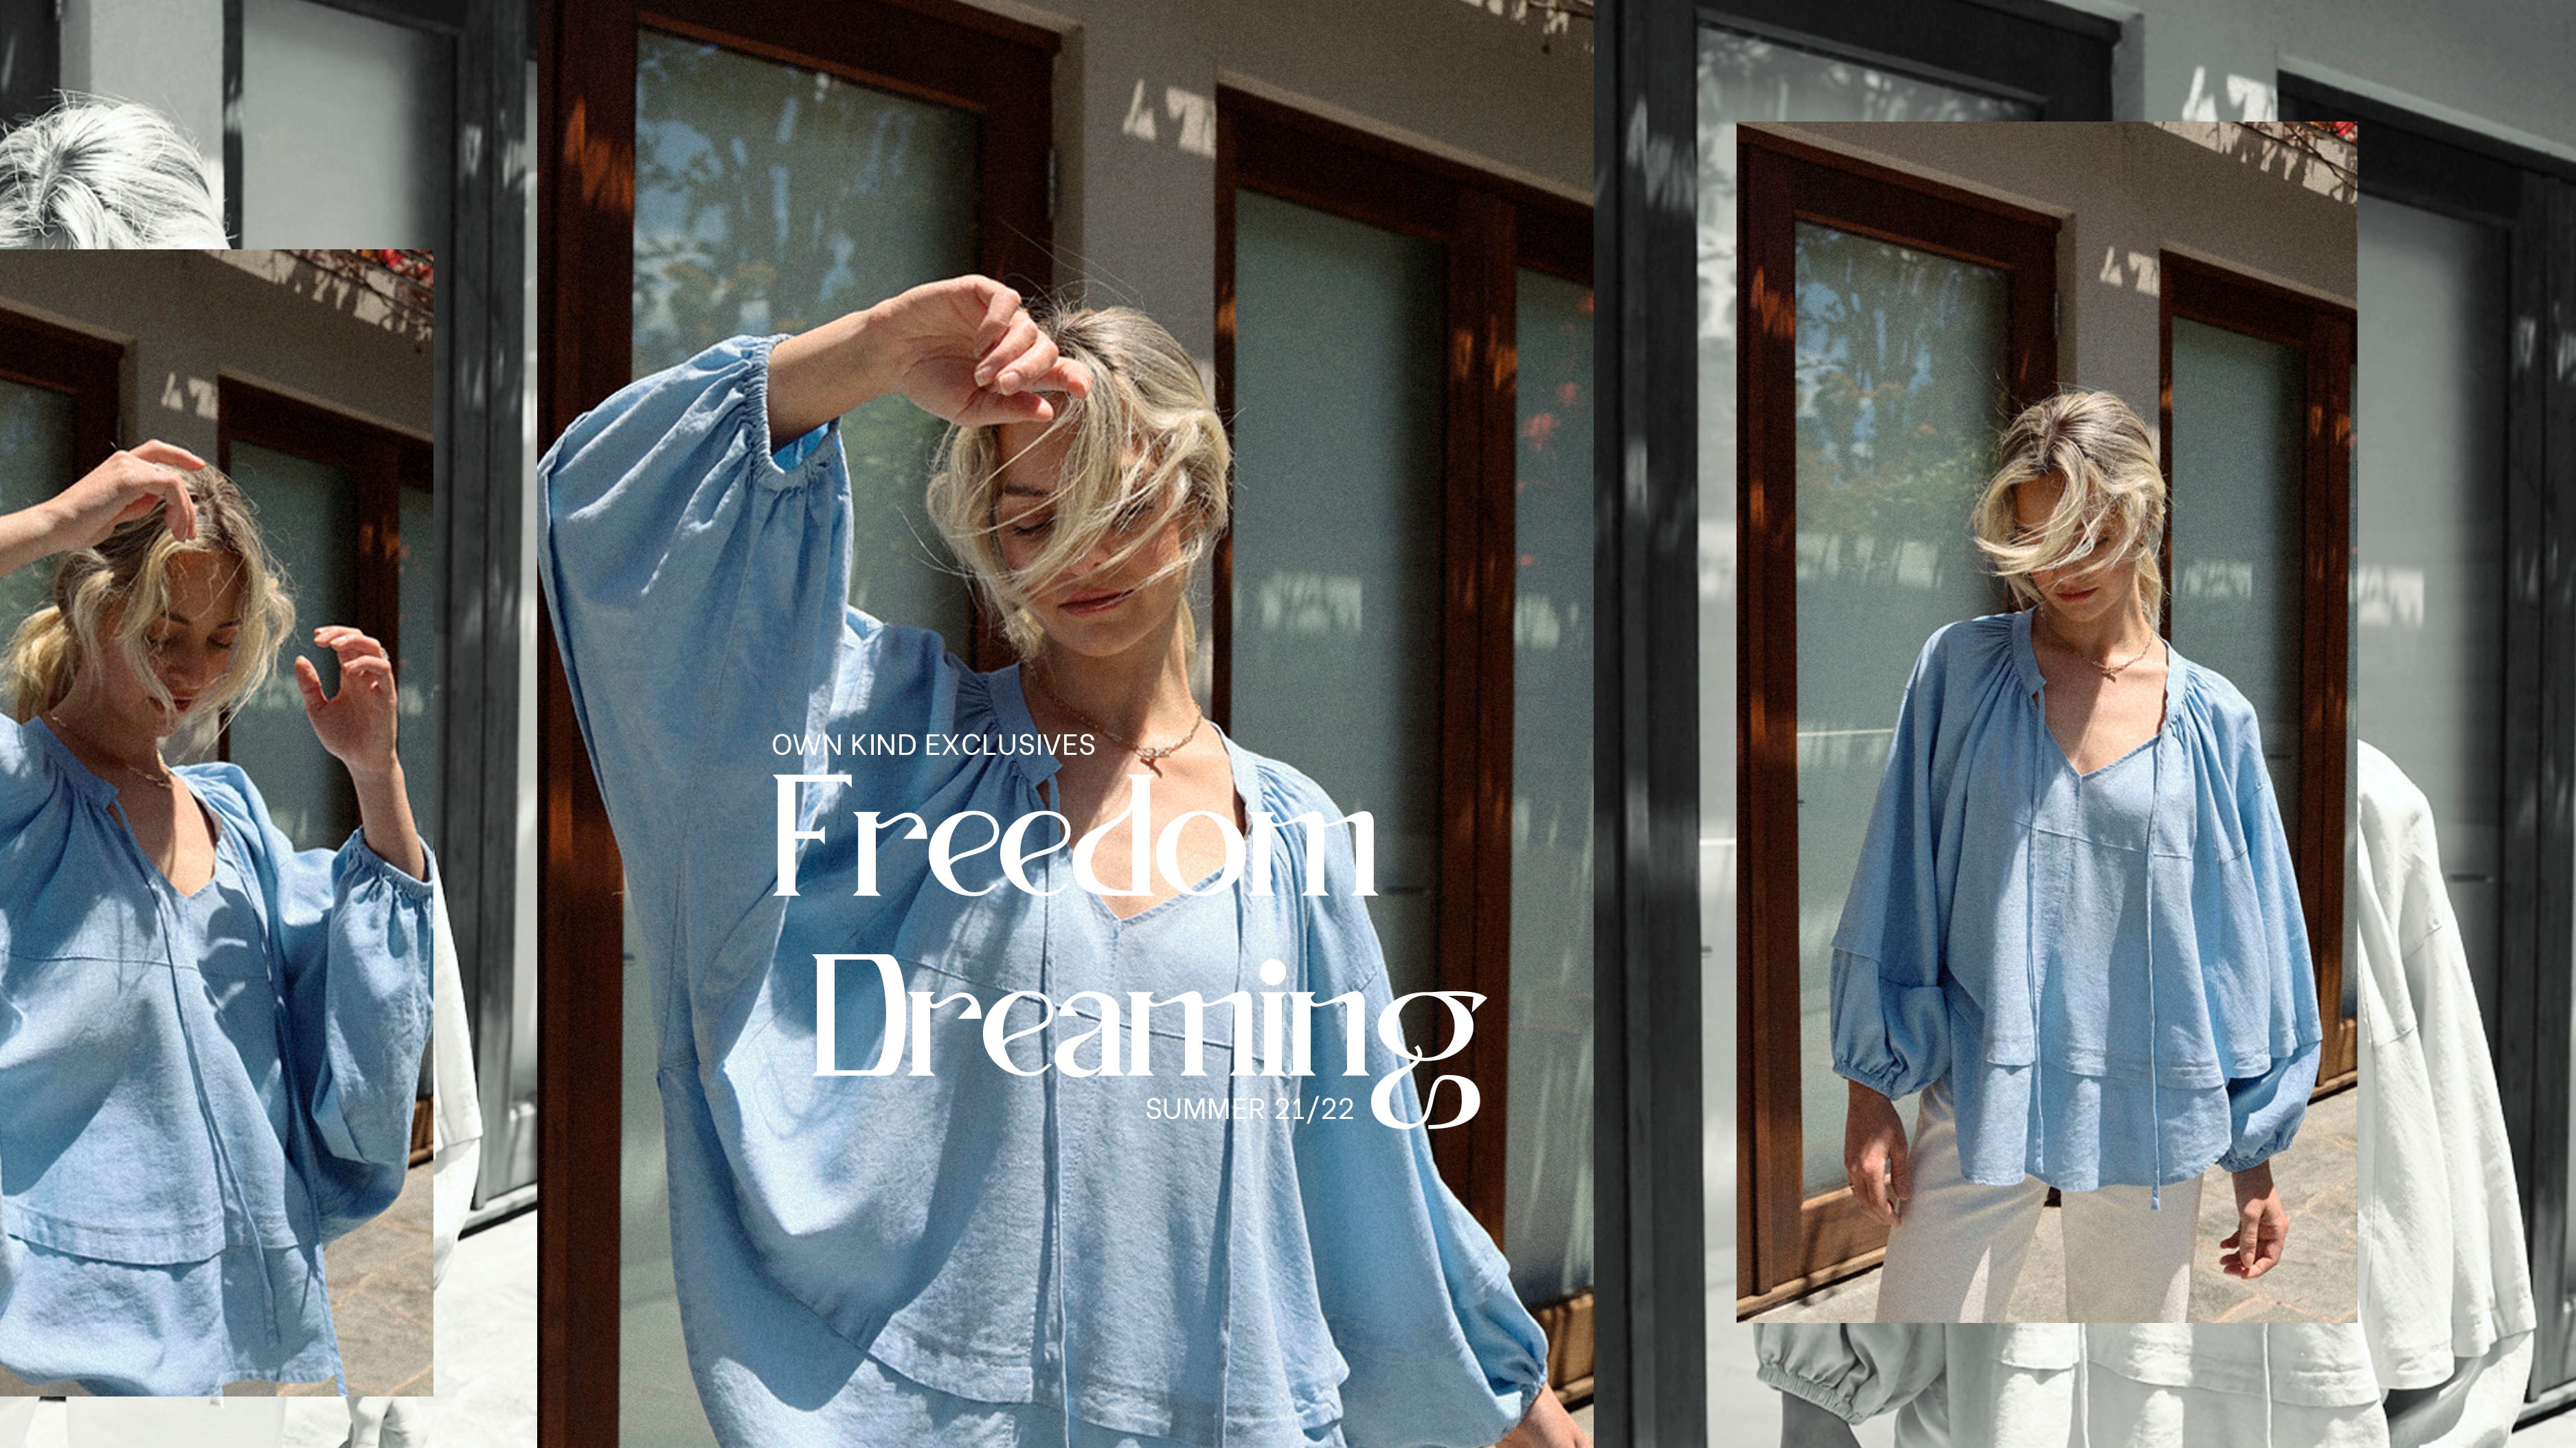 Freedom Dreaming - Our second instalment from Own Kind Exclusives